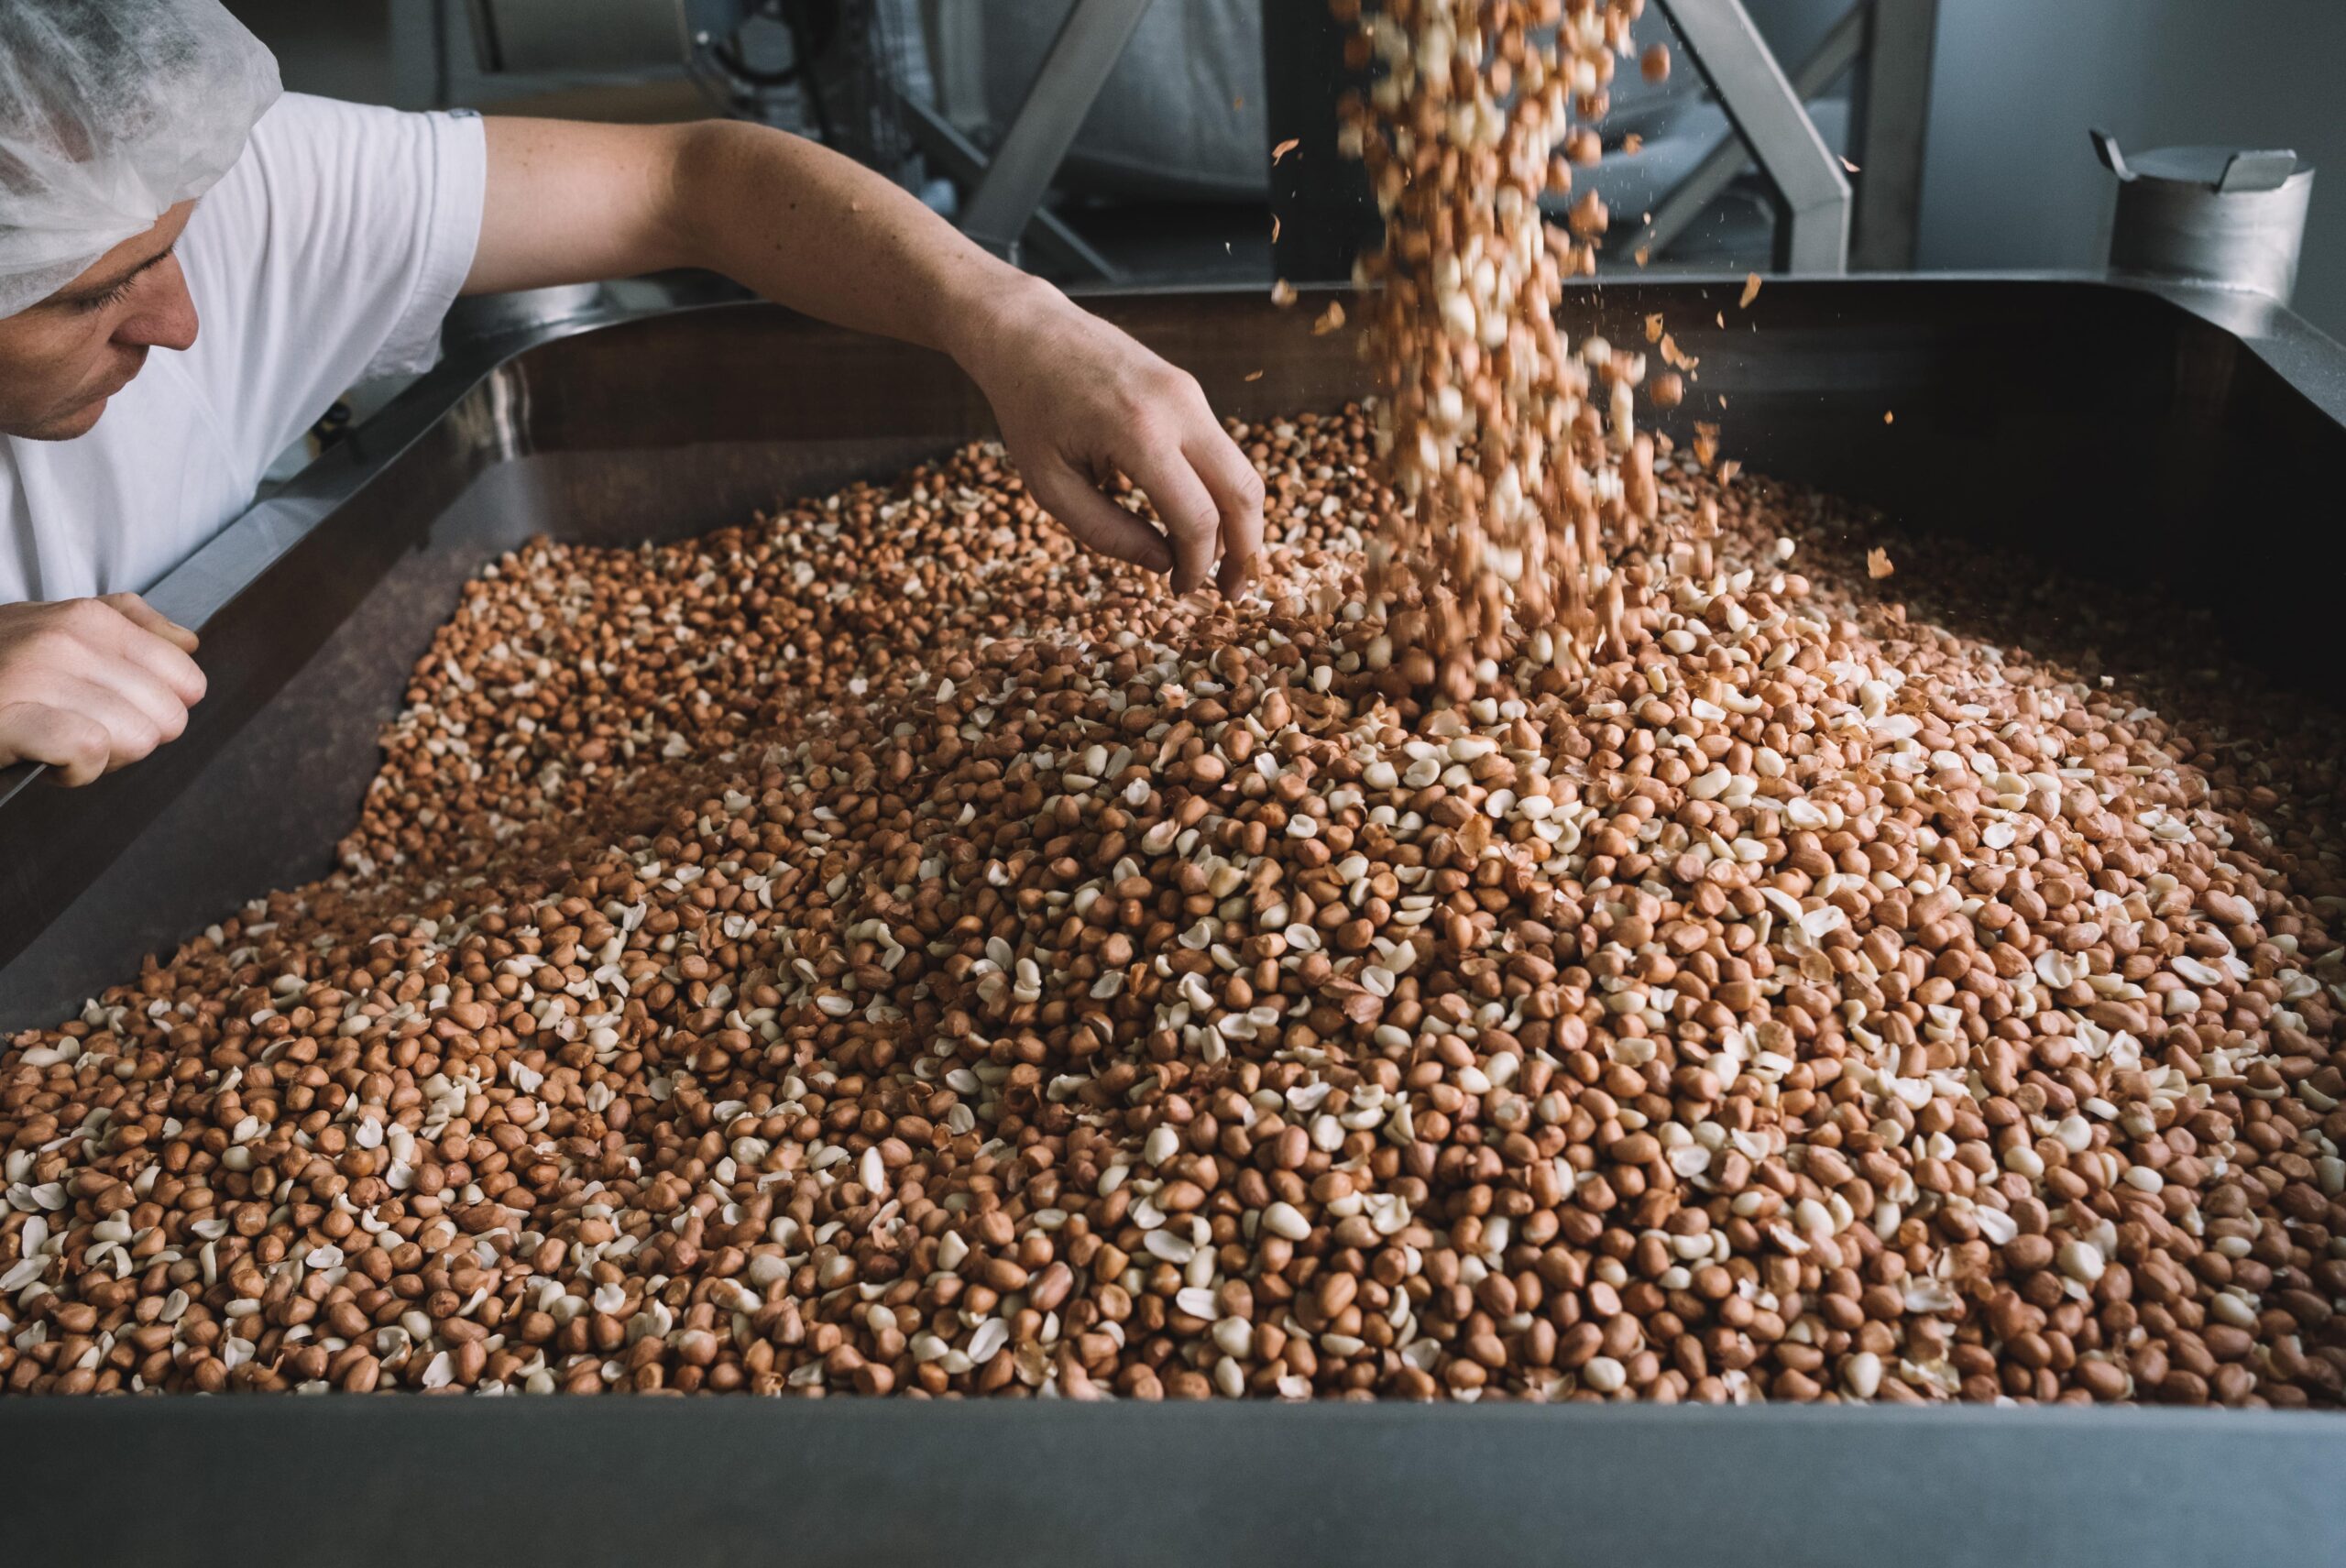 We gently press seeds nad nuts to premium oils. We work with passion and care in our oil manufacture